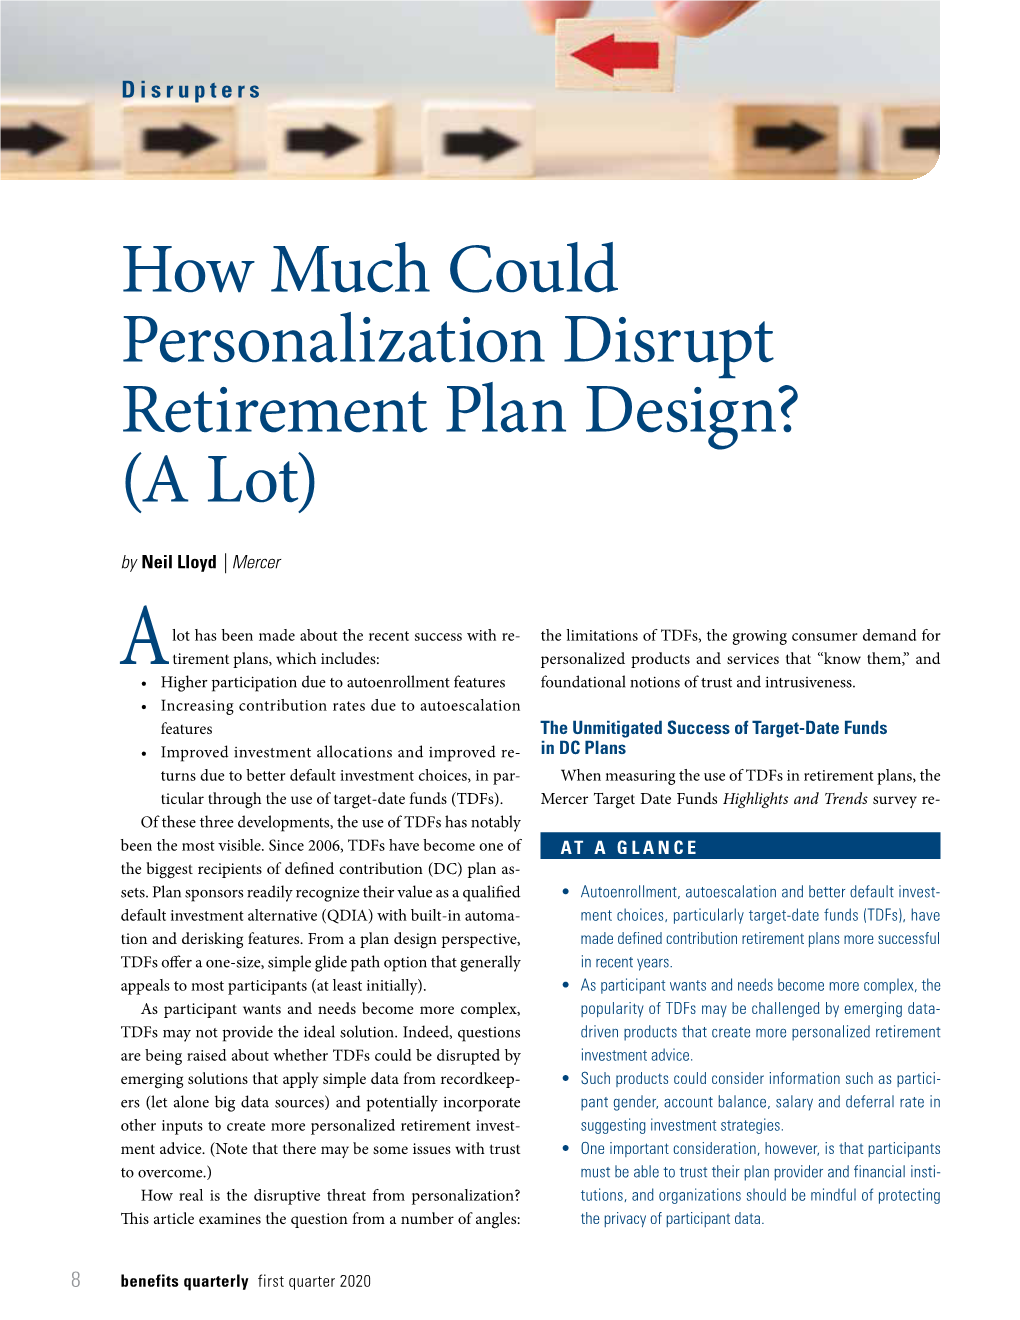 How Much Could Personalization Disrupt Retirement Plan Design? (A Lot)